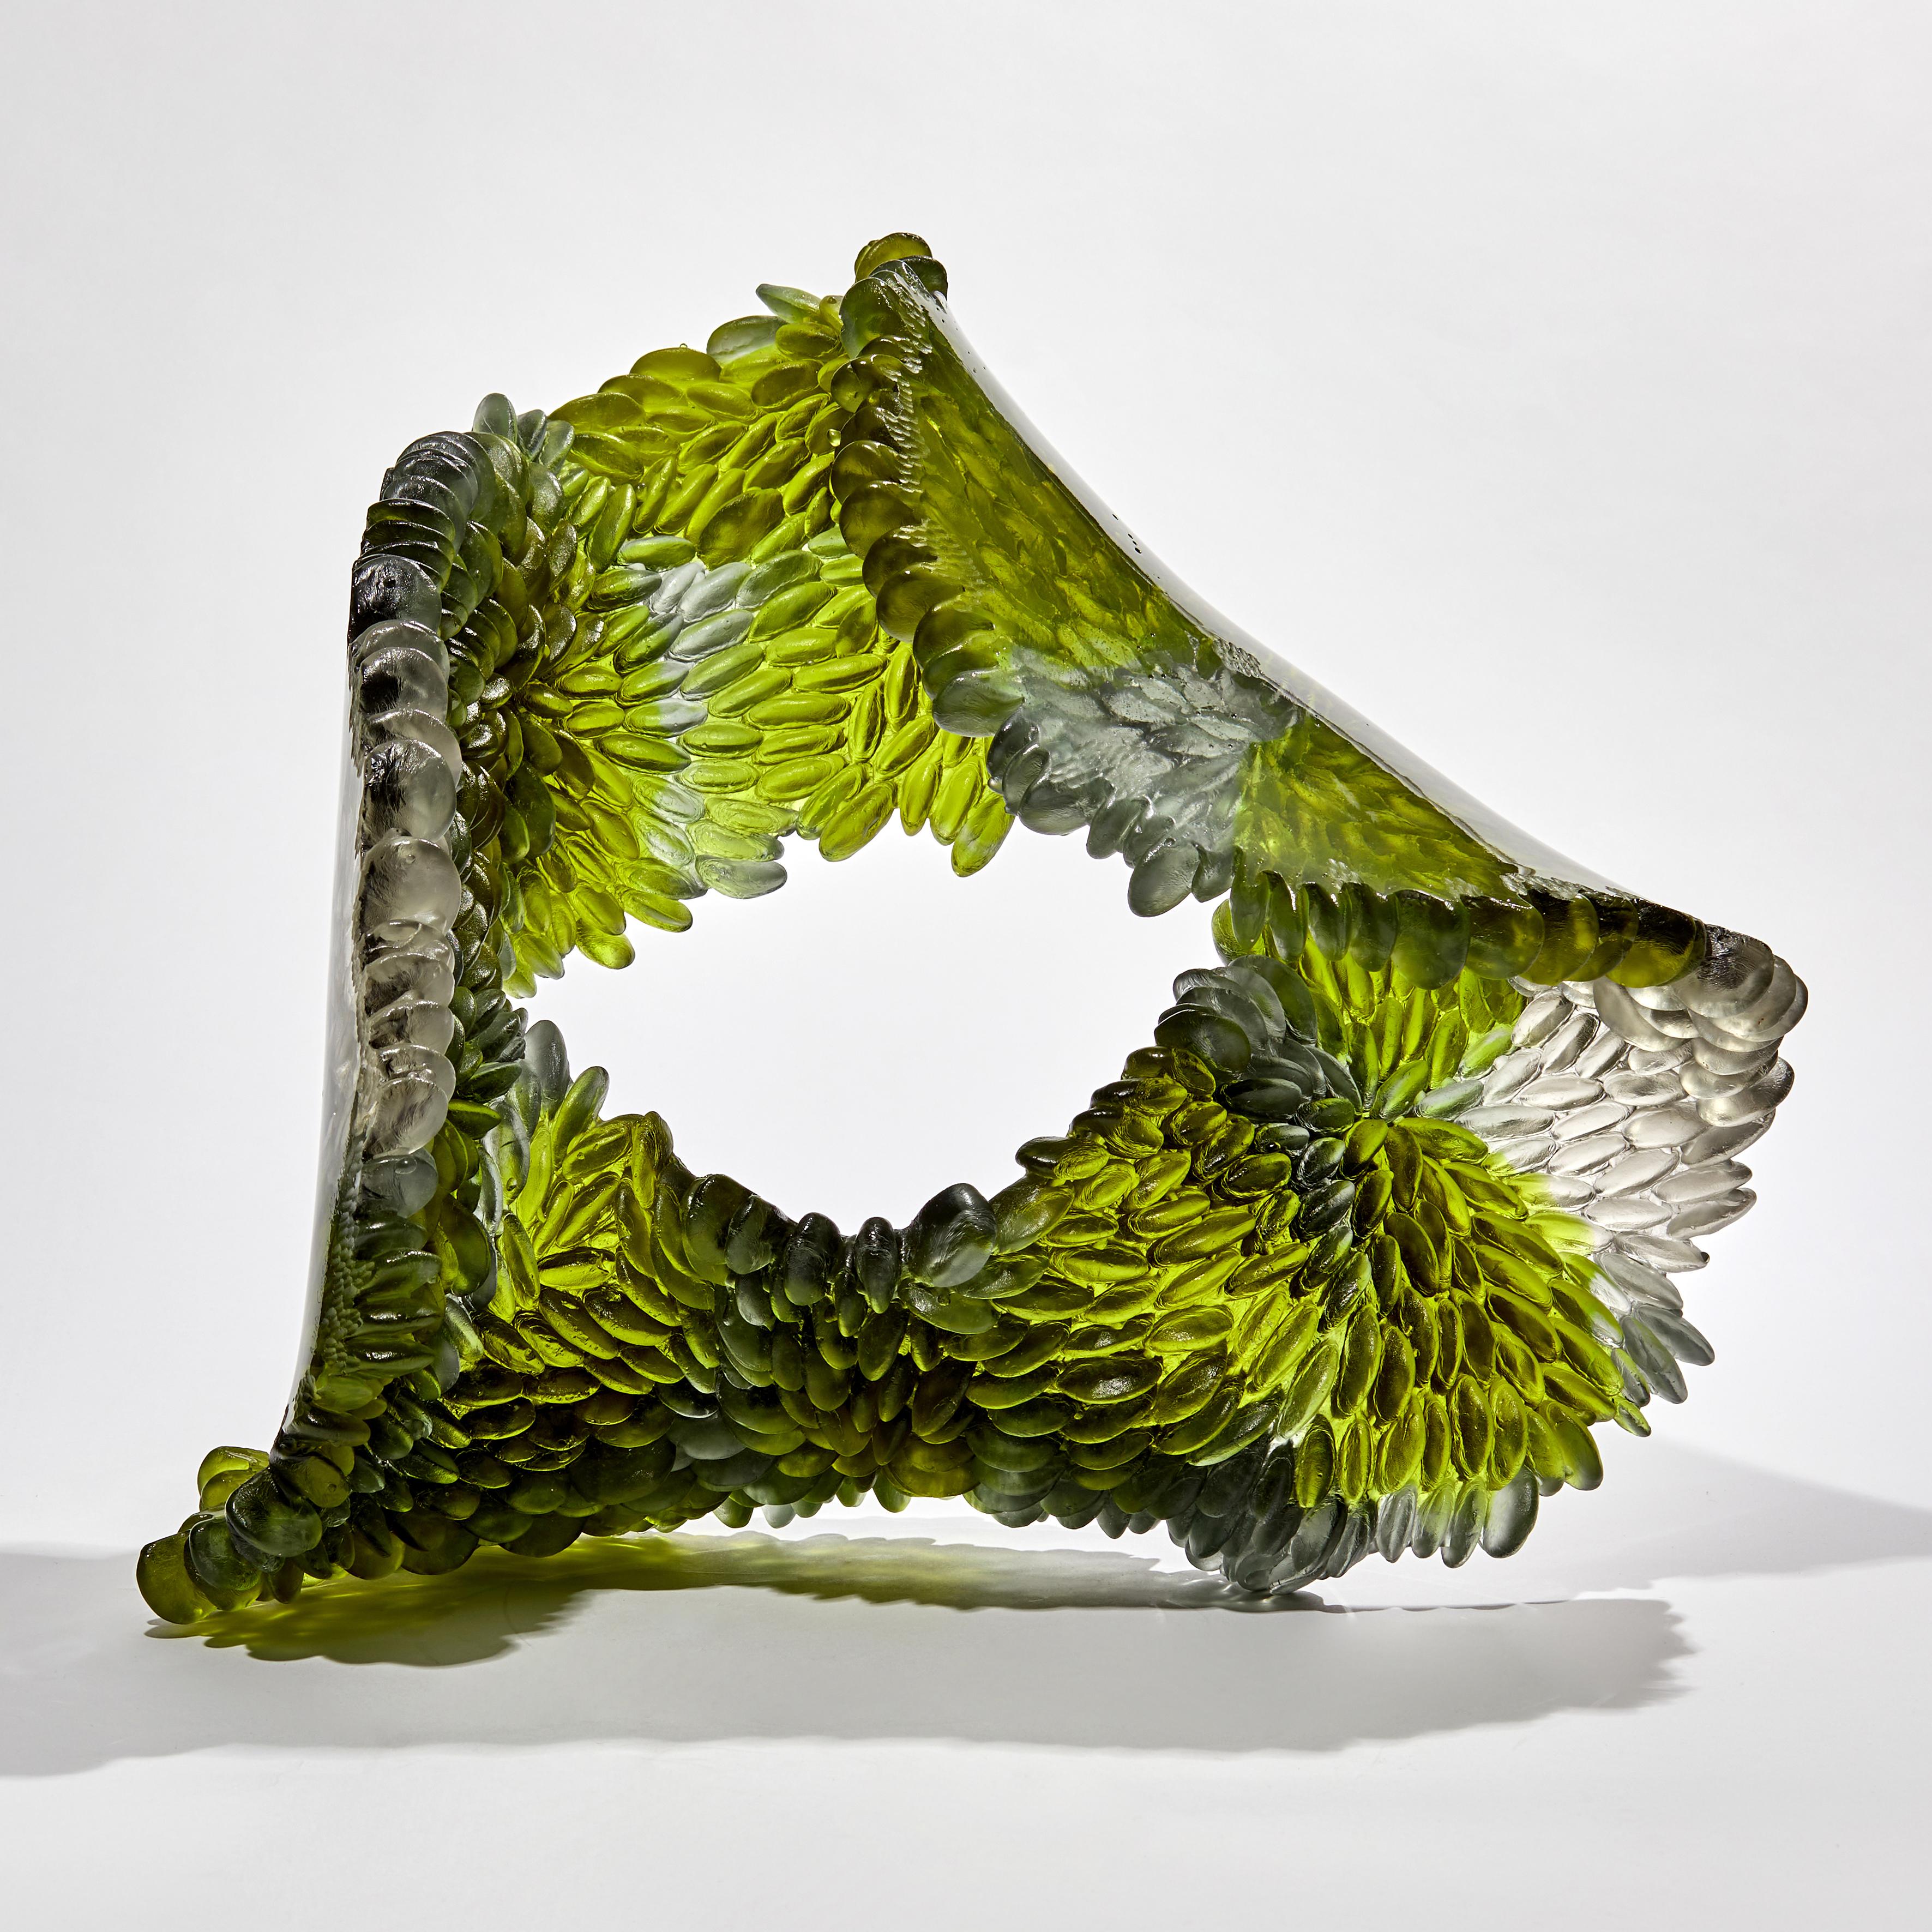 Green Oval is a unique textured glass sculpture in olive green and light grey by the British artist Nina Casson McGarva.

Casson McGarva firstly casts her glass in a flat mould where she introduces all of the beautifully detailed, scaled surface